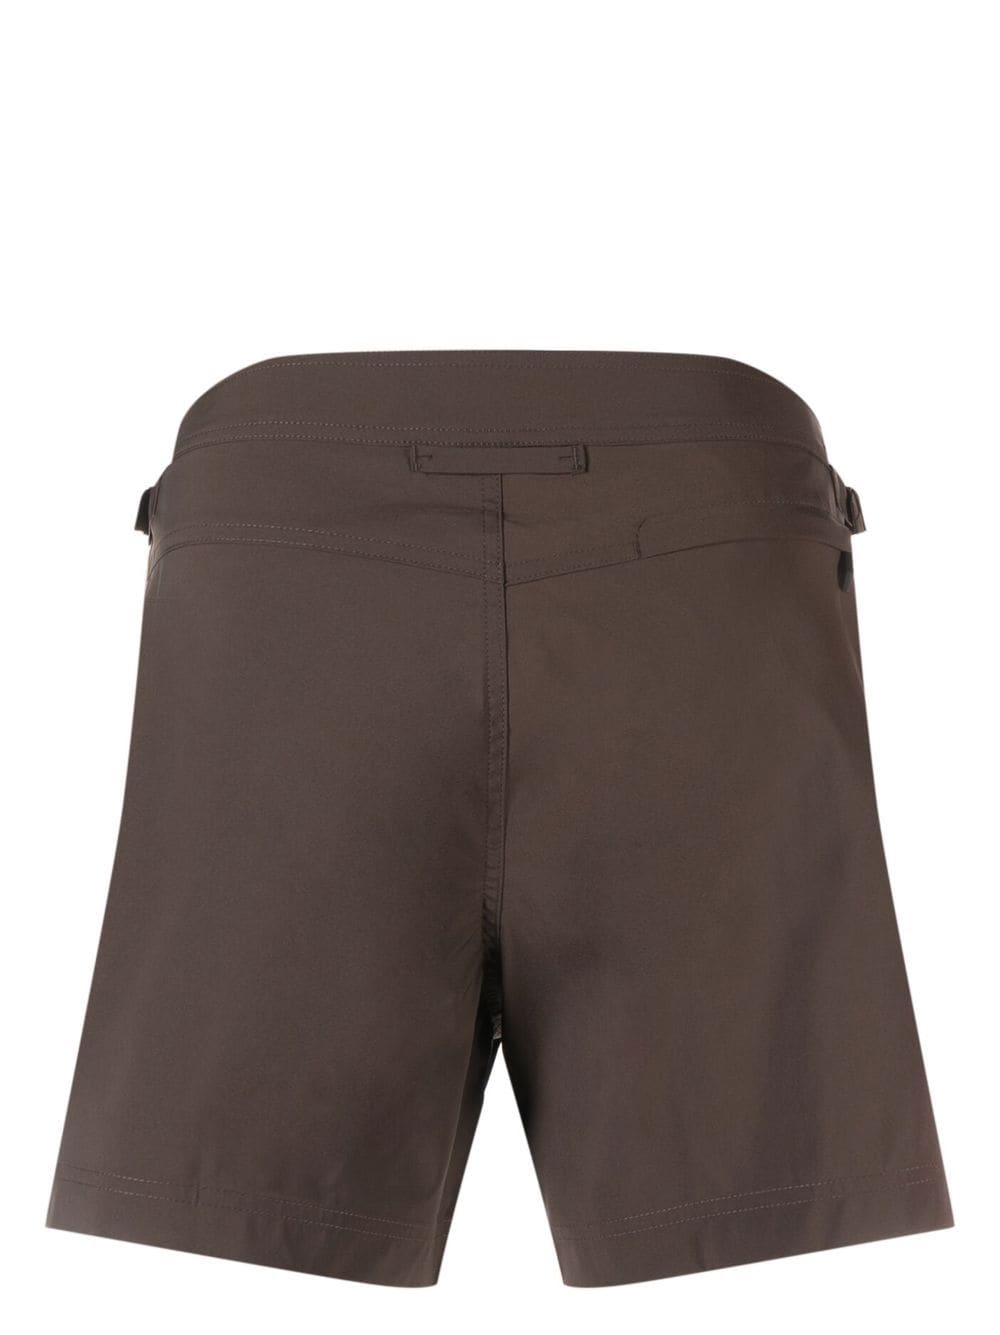 Image 2 of TOM FORD side buckle swim shorts